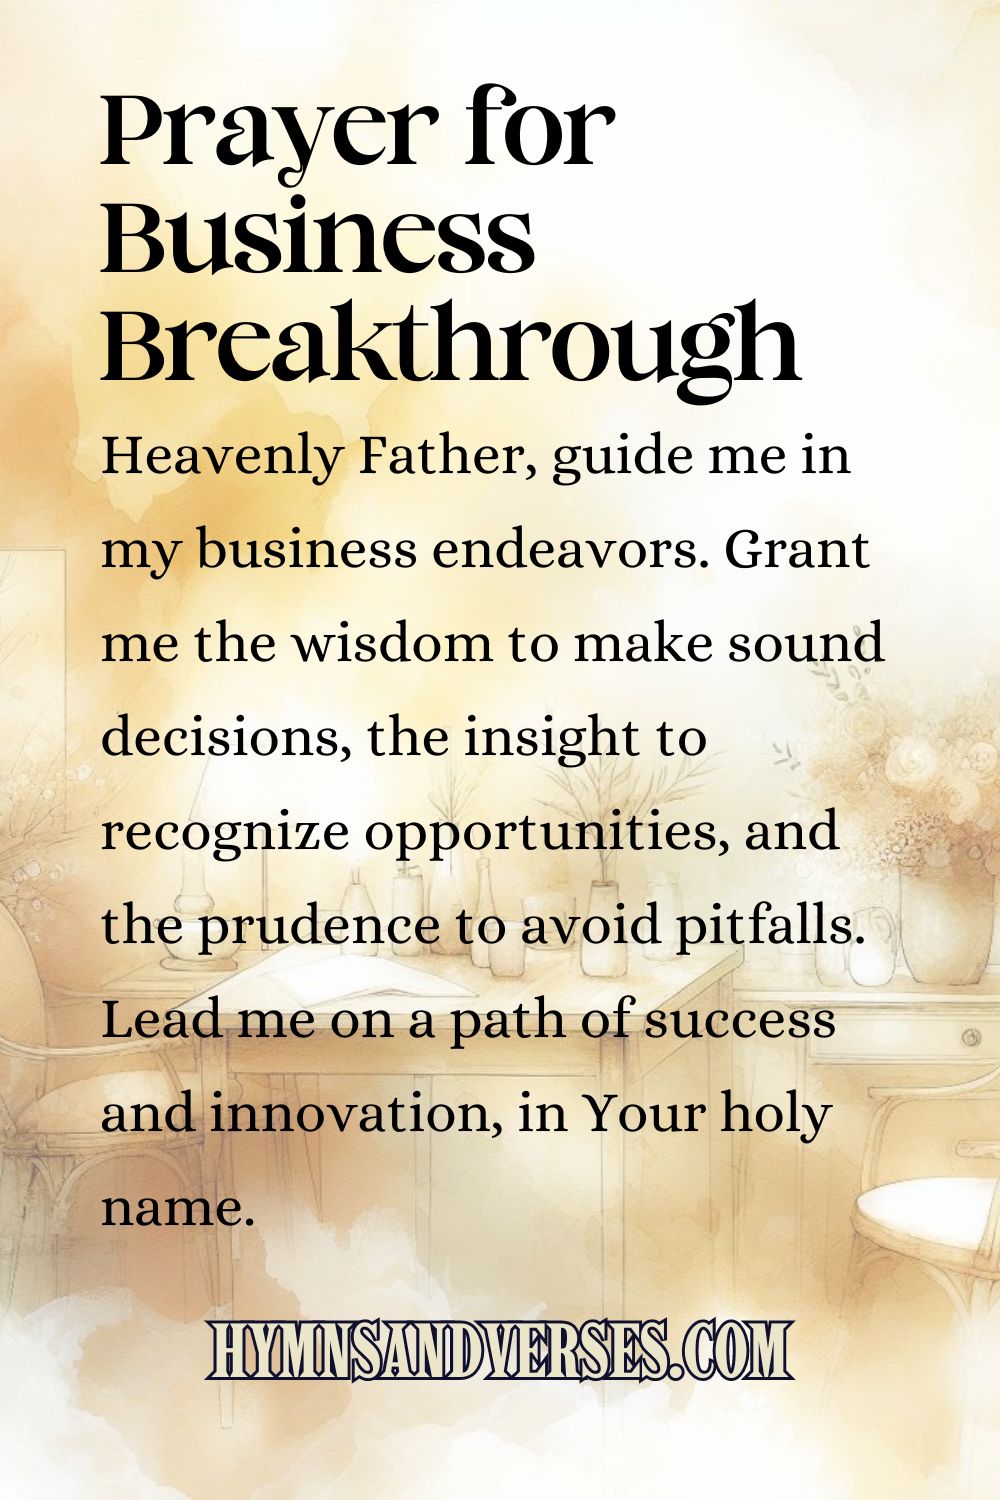 Pin sized image for Prayers for Business Breakthrough, reads: Heavenly Father, guide me in my business endeavors. Grant me the wisdom to make sound decisions, the insight to recognize opportunities, and the prudence to avoid pitfalls. Lead me on a path of success and innovation, in Your holy name.